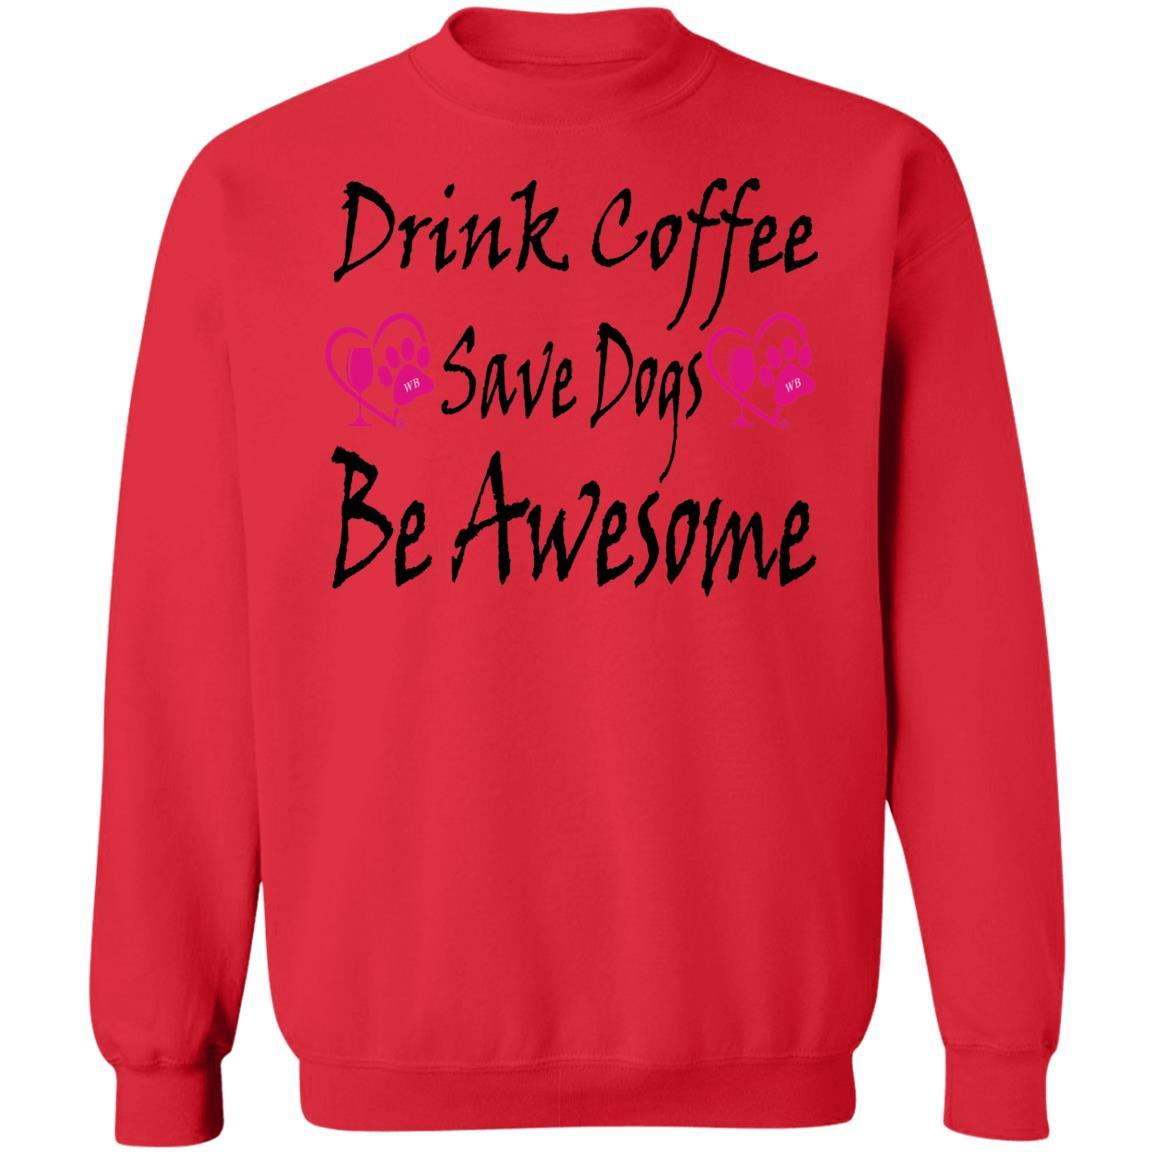 Sweatshirts Red / S Winey Bitches Co "Drink Coffee Save Dogs Be Awesome" Crewneck Pullover Sweatshirt  8 oz. WineyBitchesCo